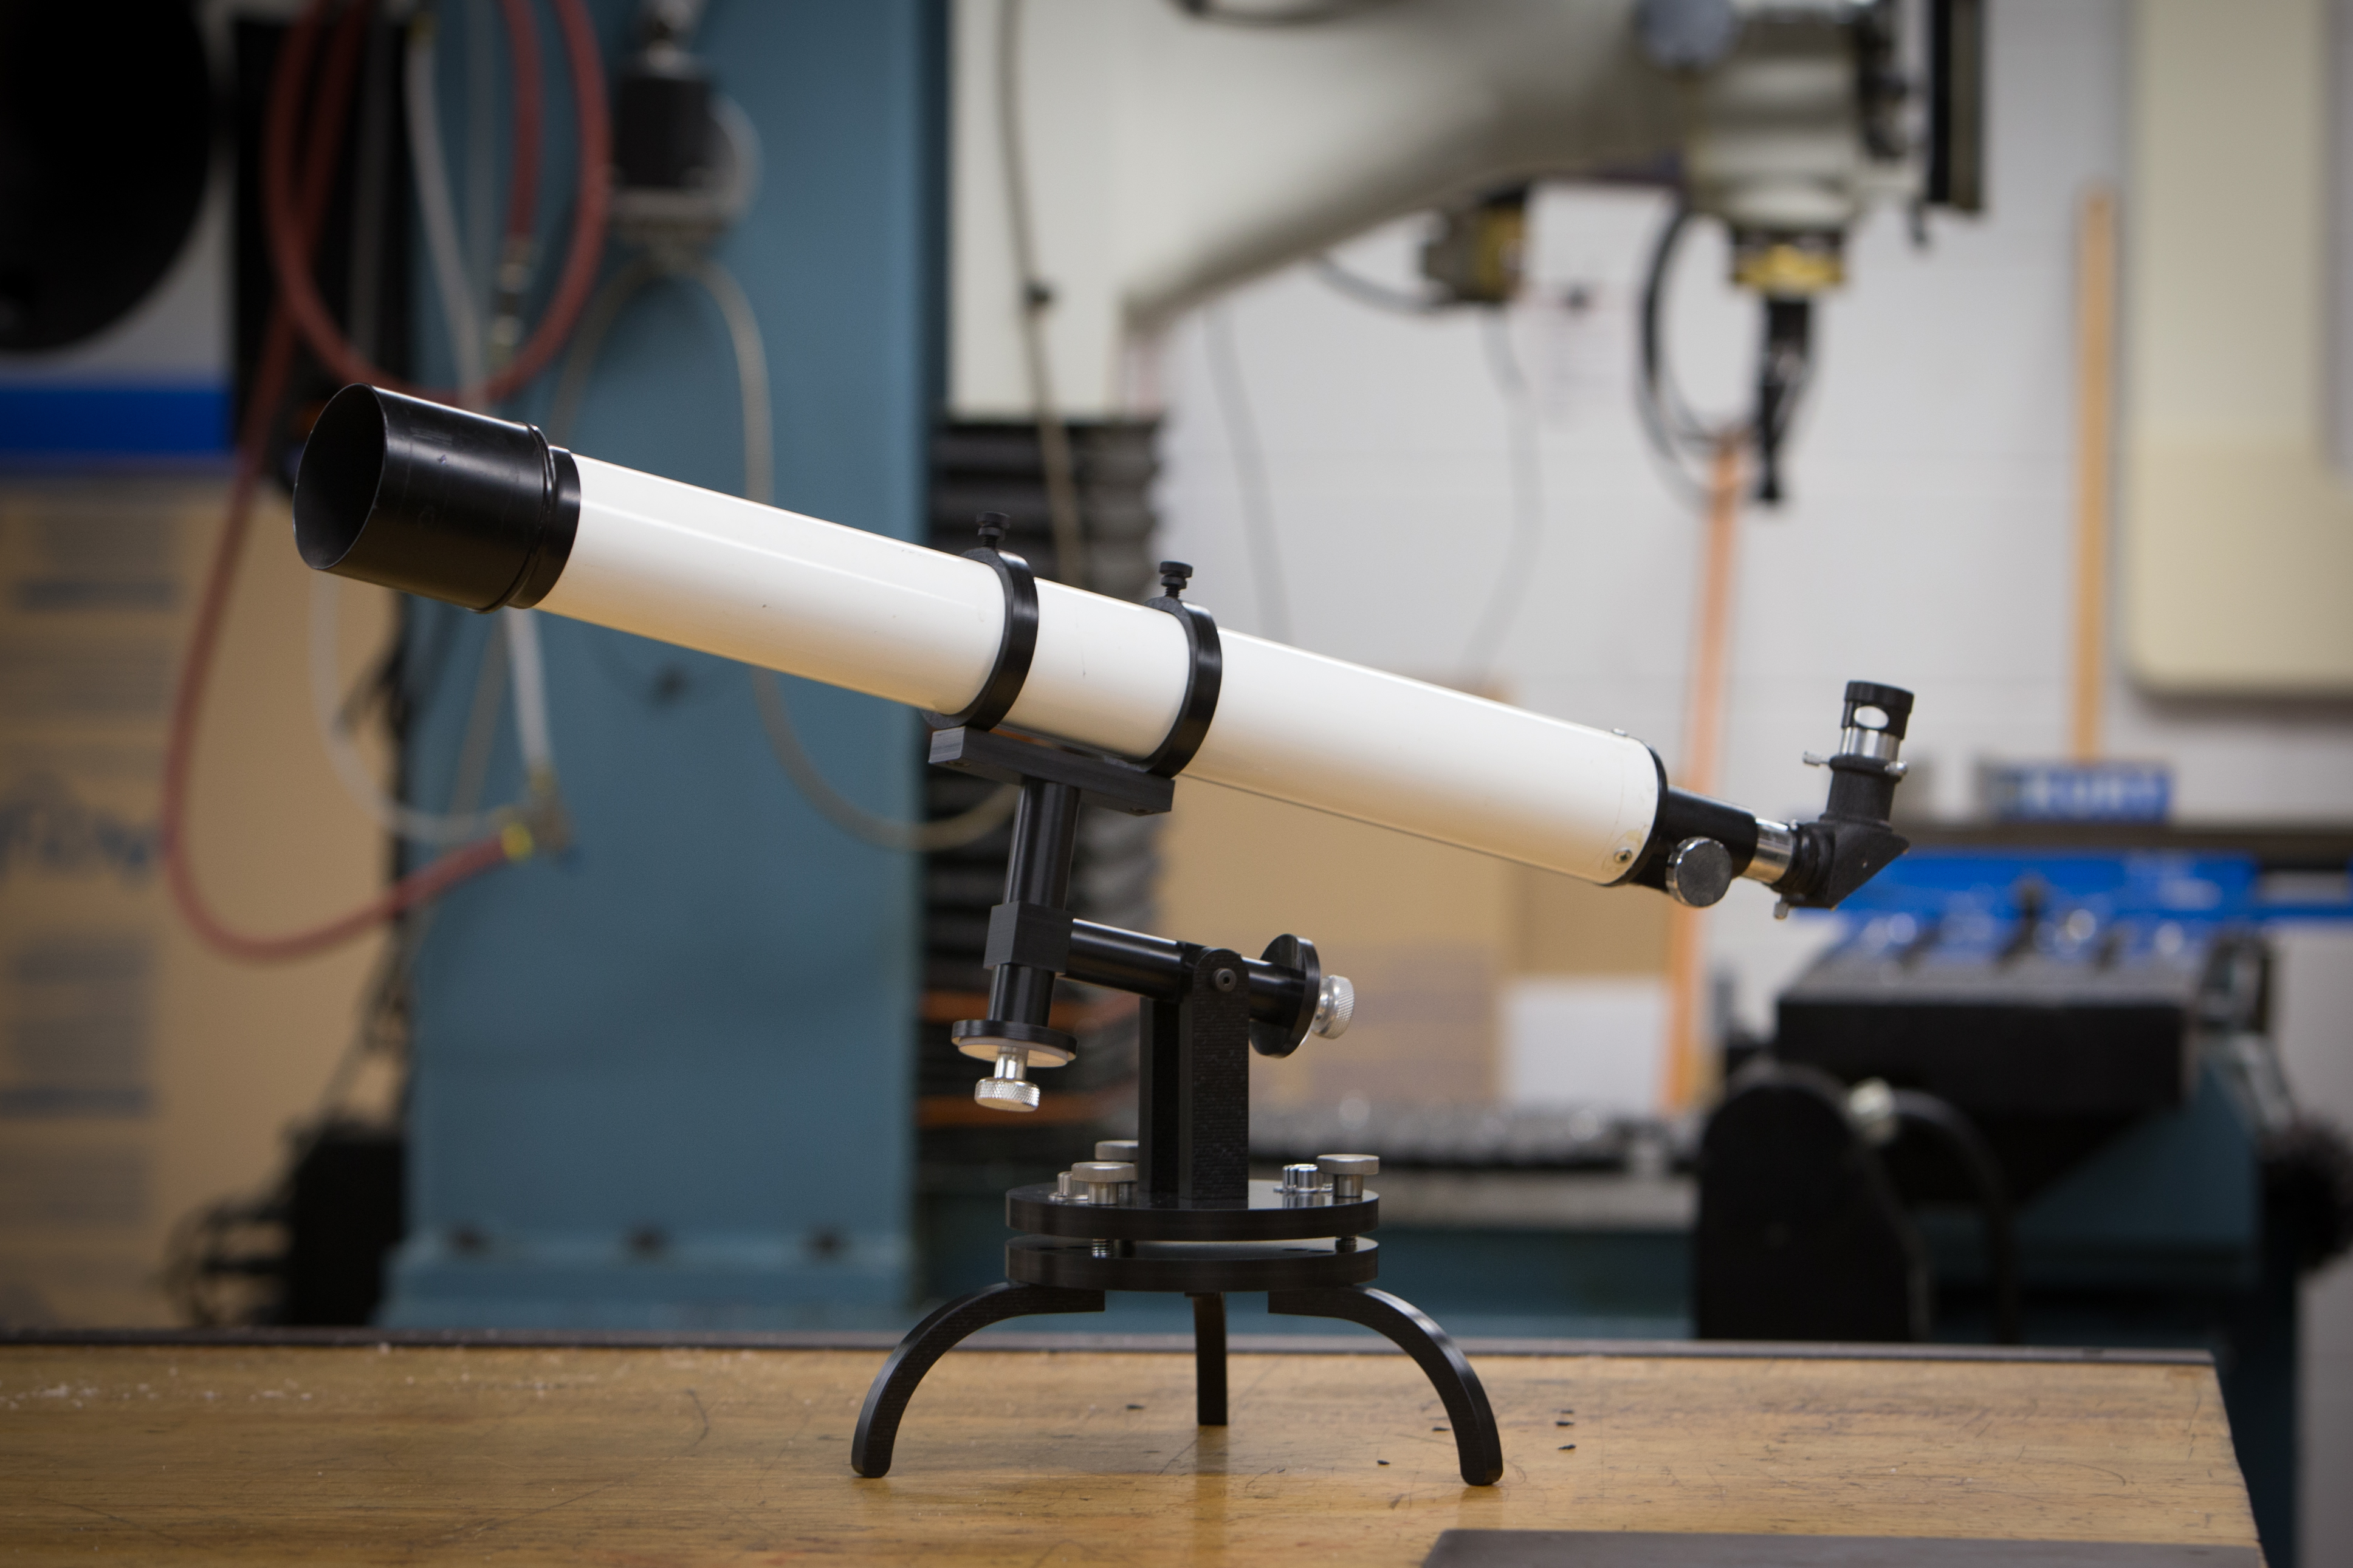 The telescope found in the physics department